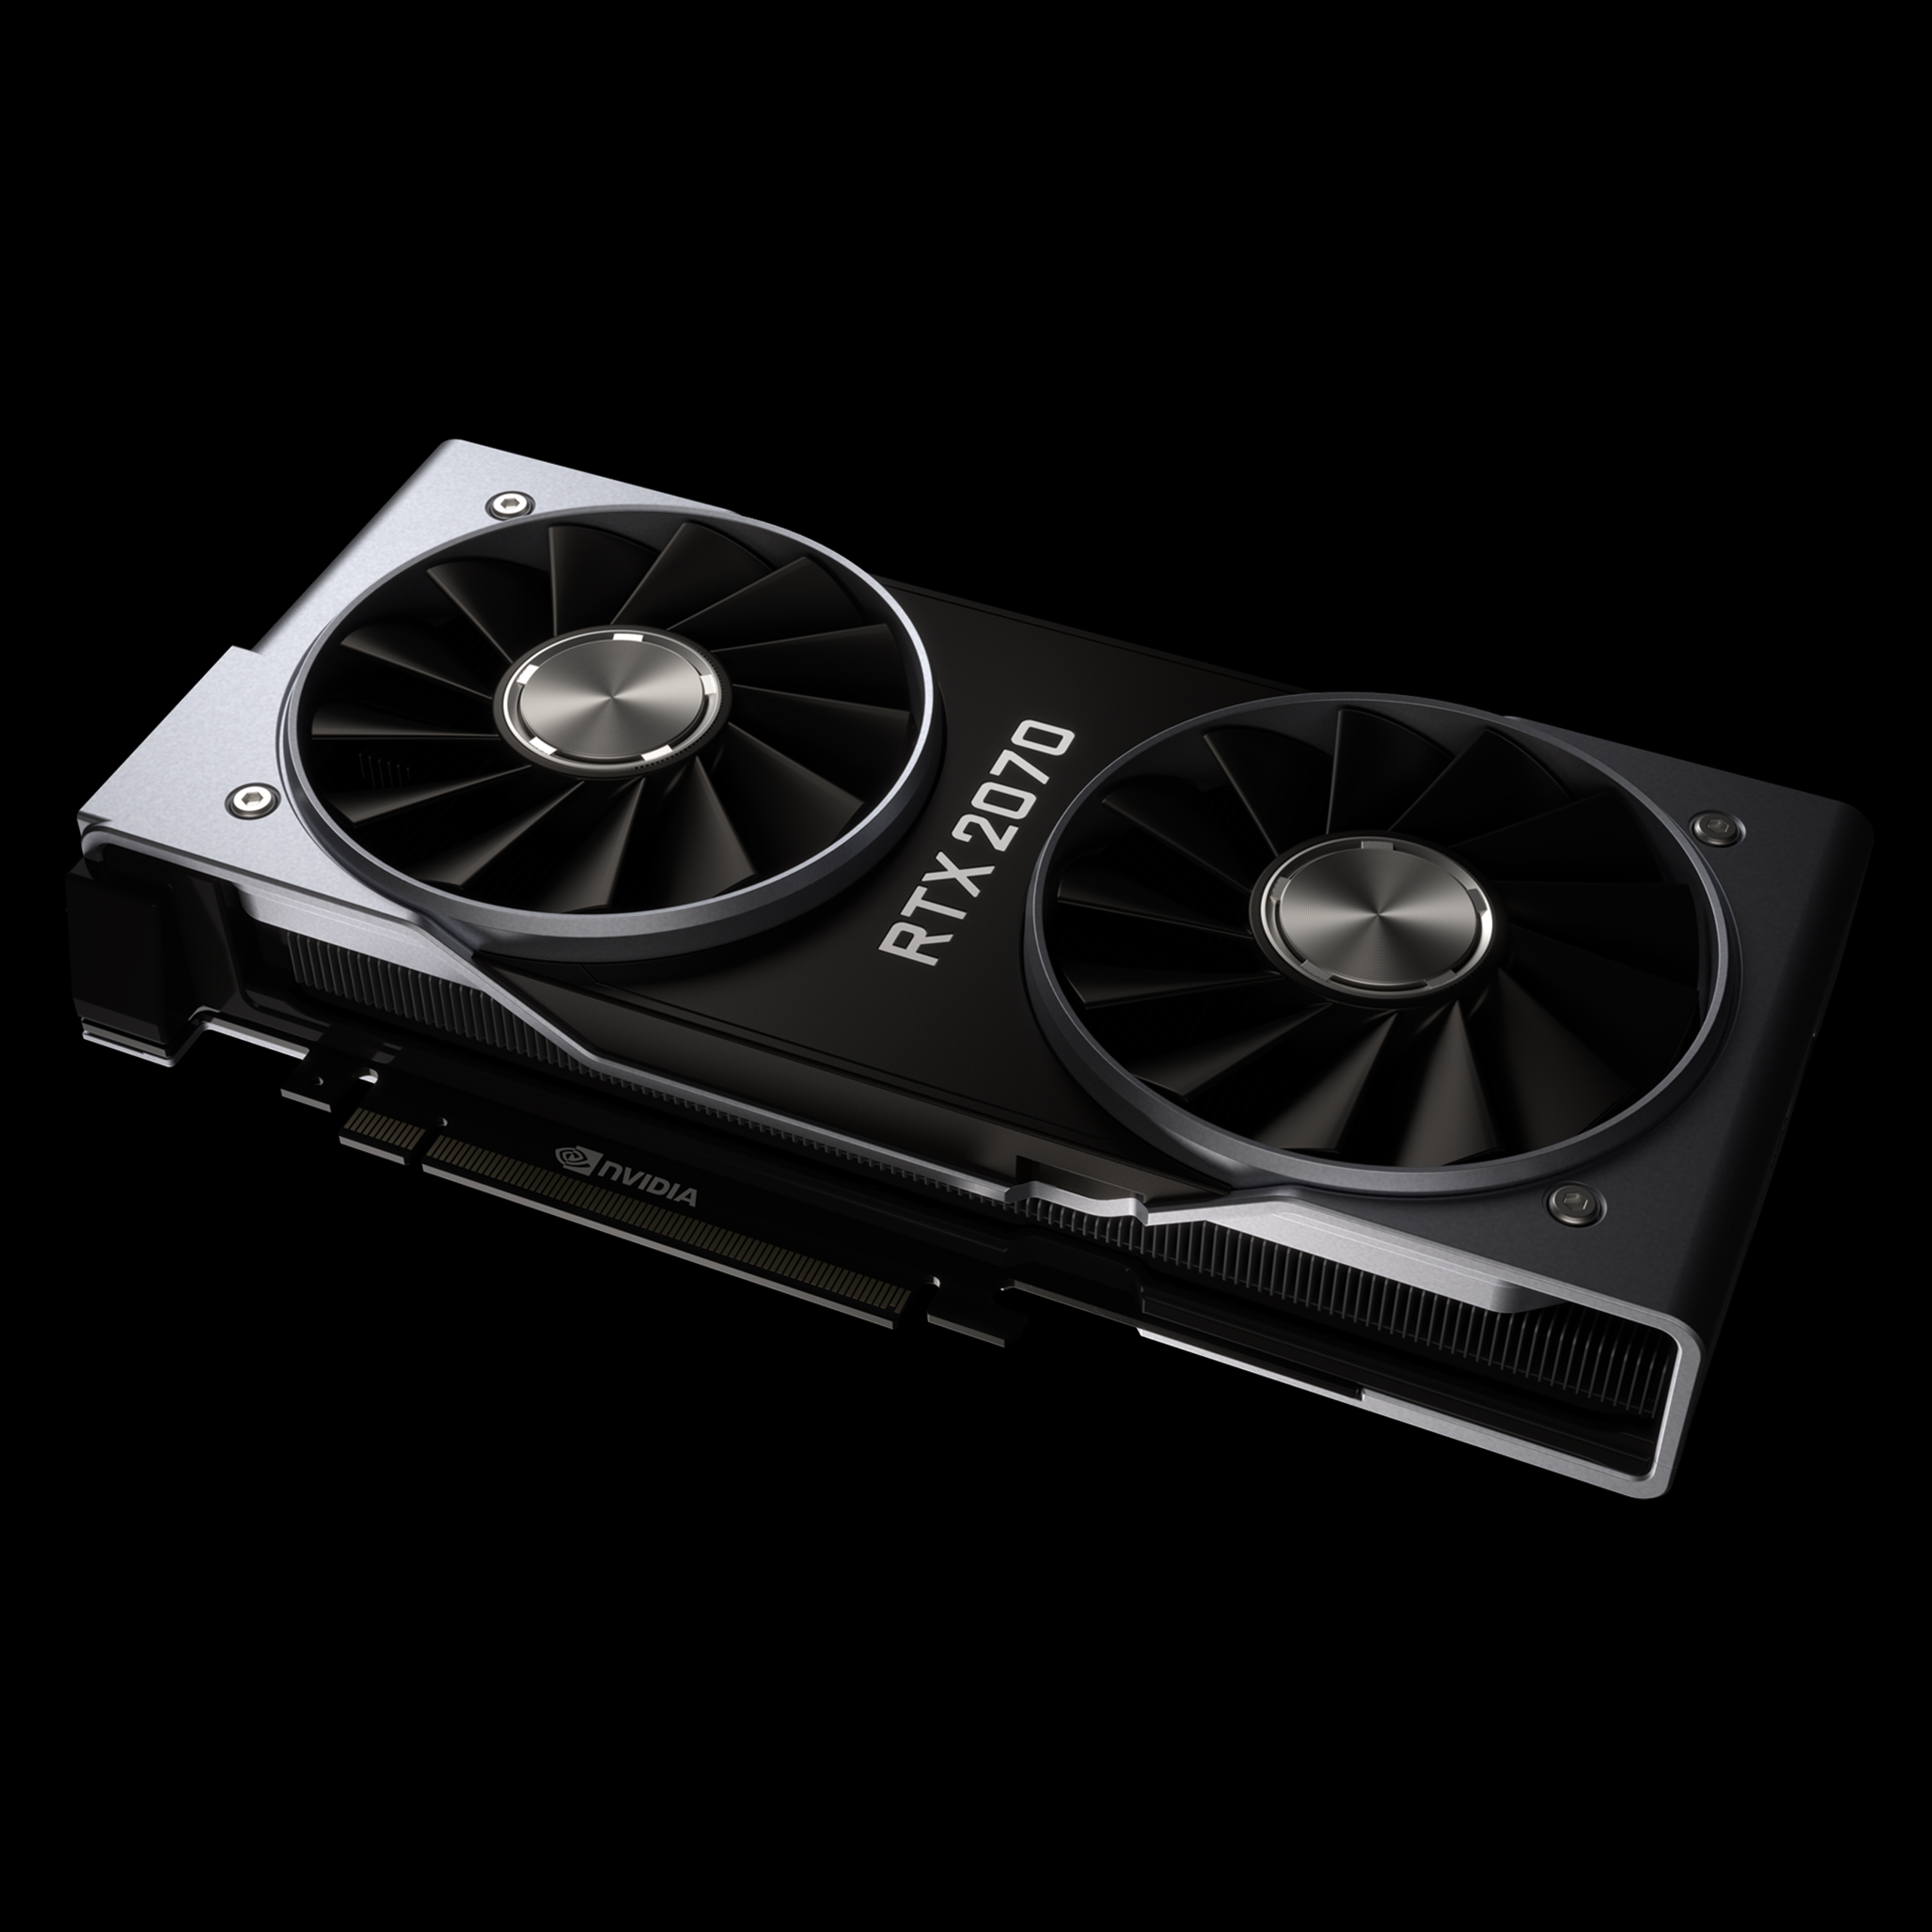 GeForce RTX 2070 Graphics Cards | NVIDIA